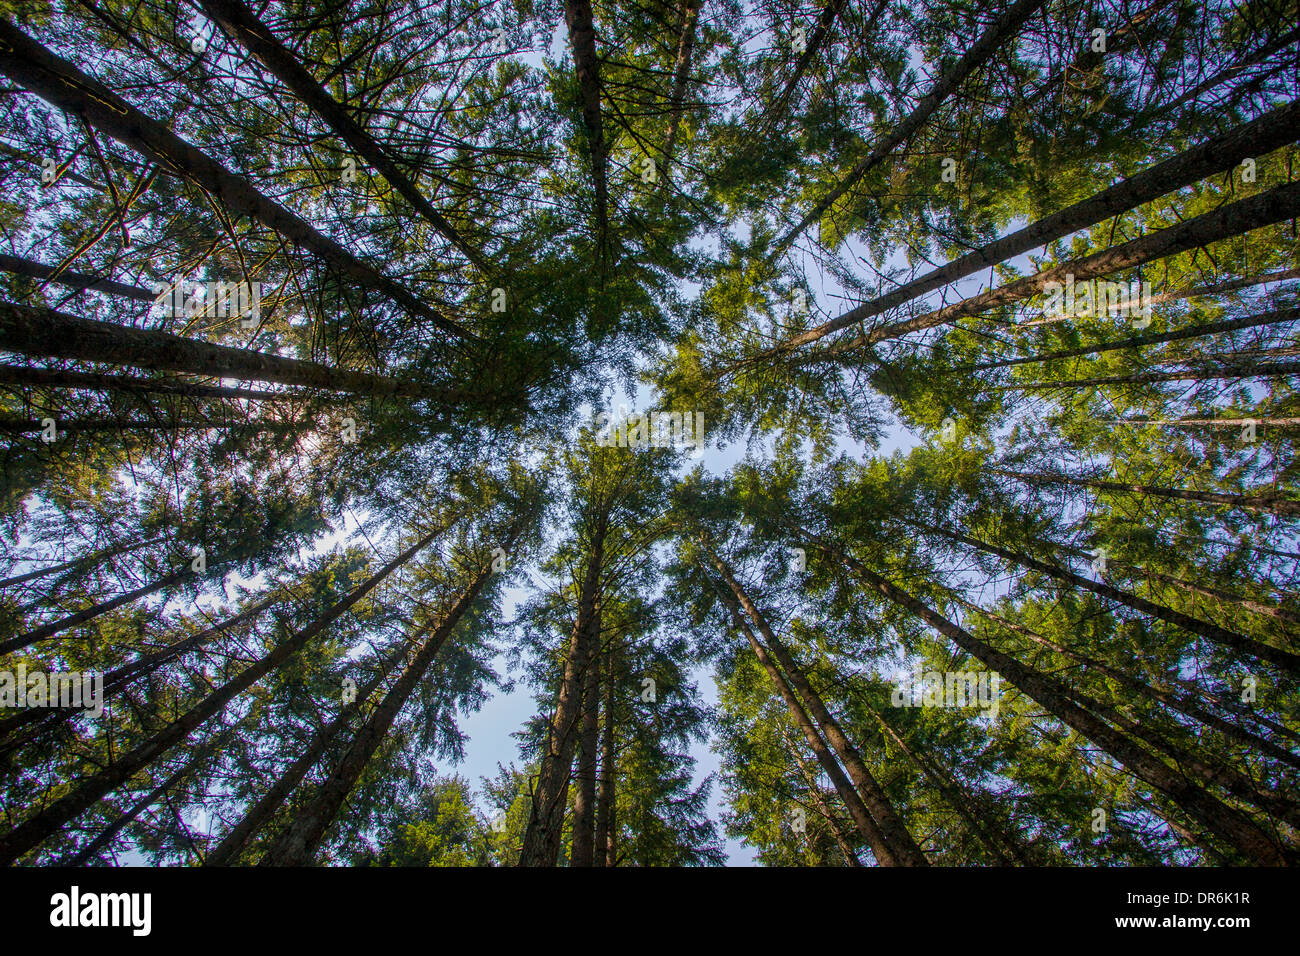 Looking up in a forest of Douglas Fir trees, Oregon, USA Stock Photo